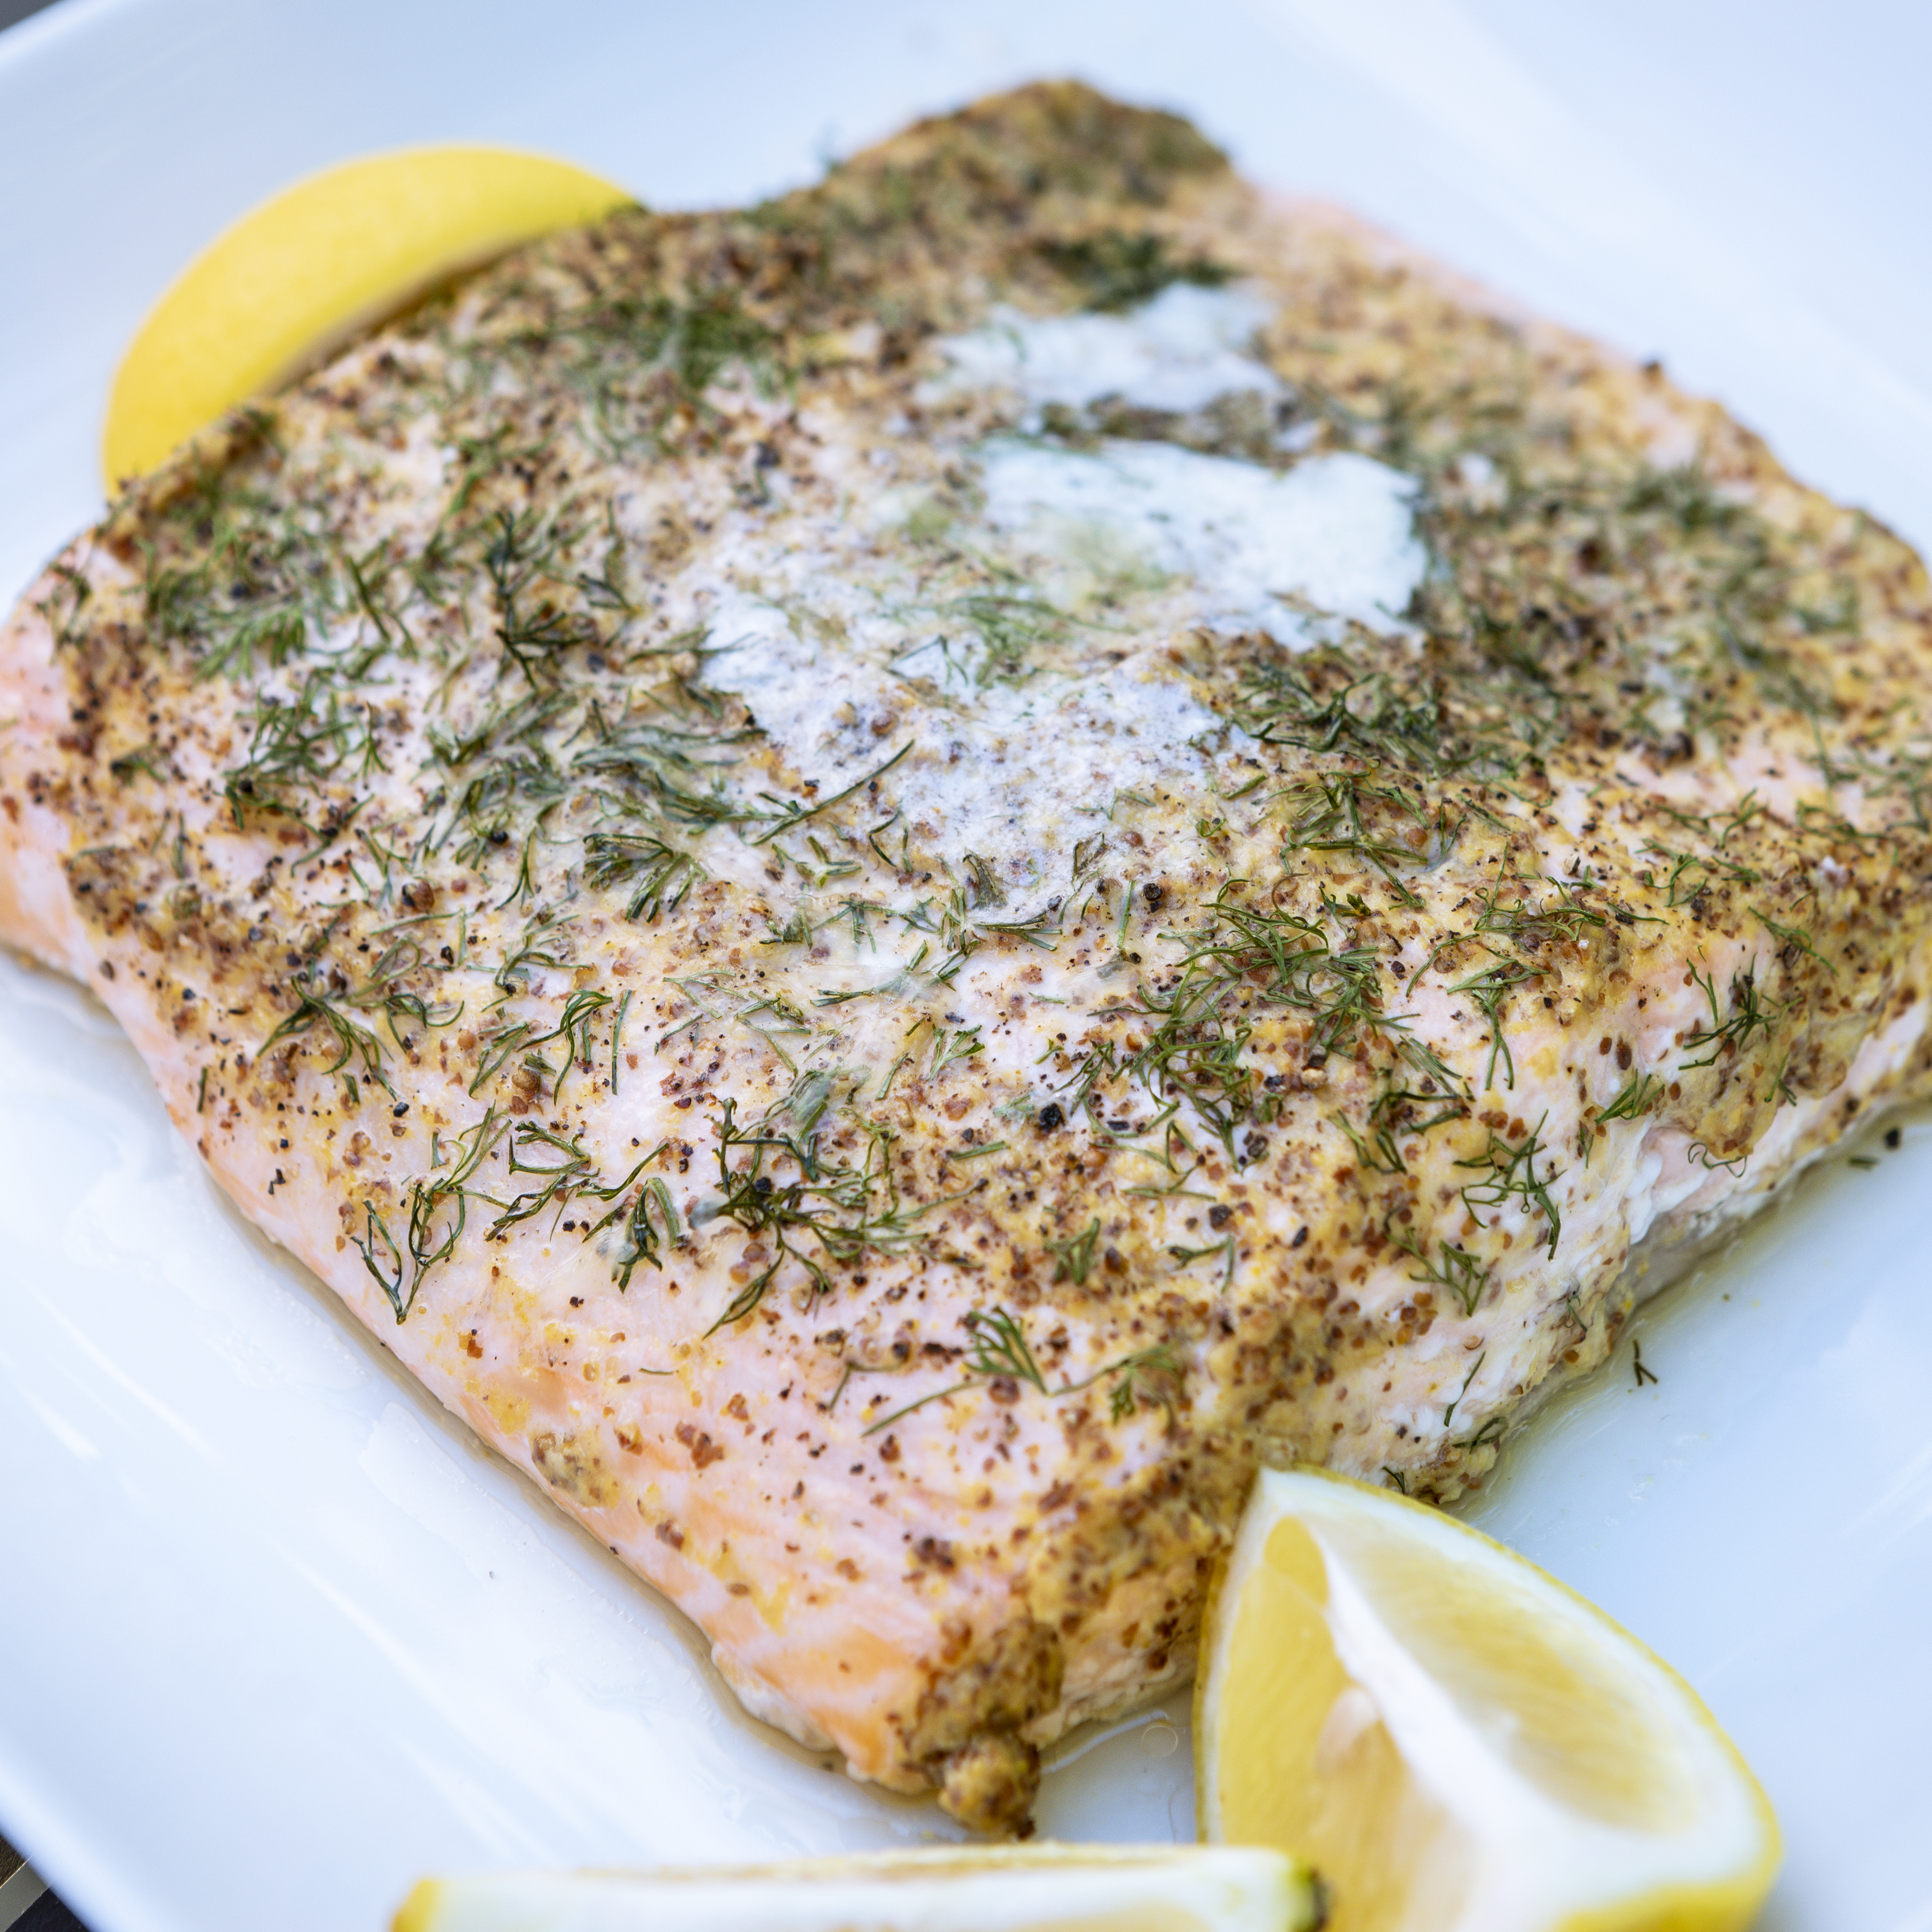 Annie Starke's Salmon with Mustard, Lemon, and Dill